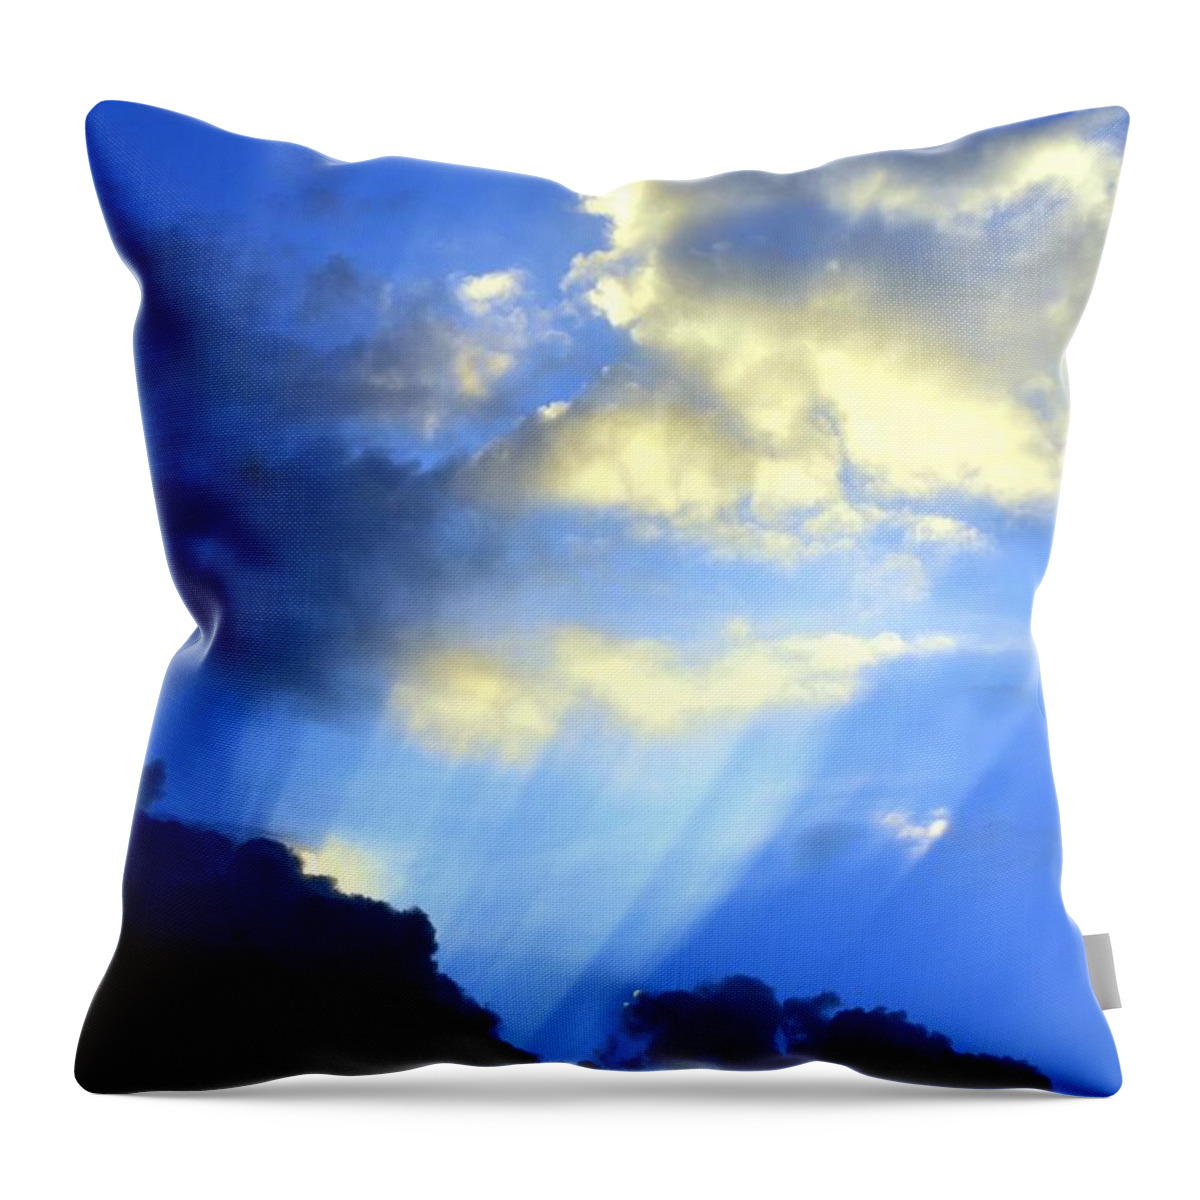 Prismed Throw Pillow featuring the photograph Prismed by Maria Urso